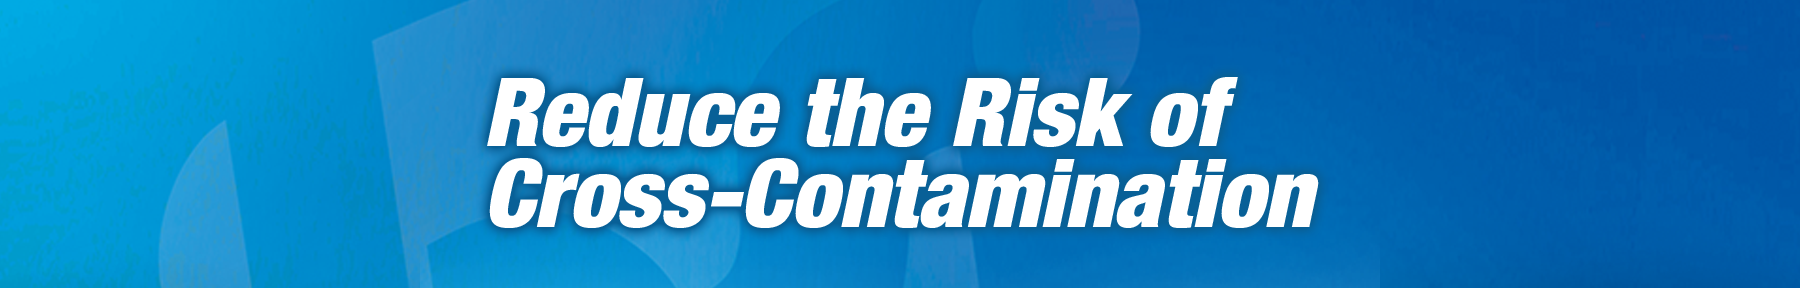 Reduce the Risk of Cross-Contamination